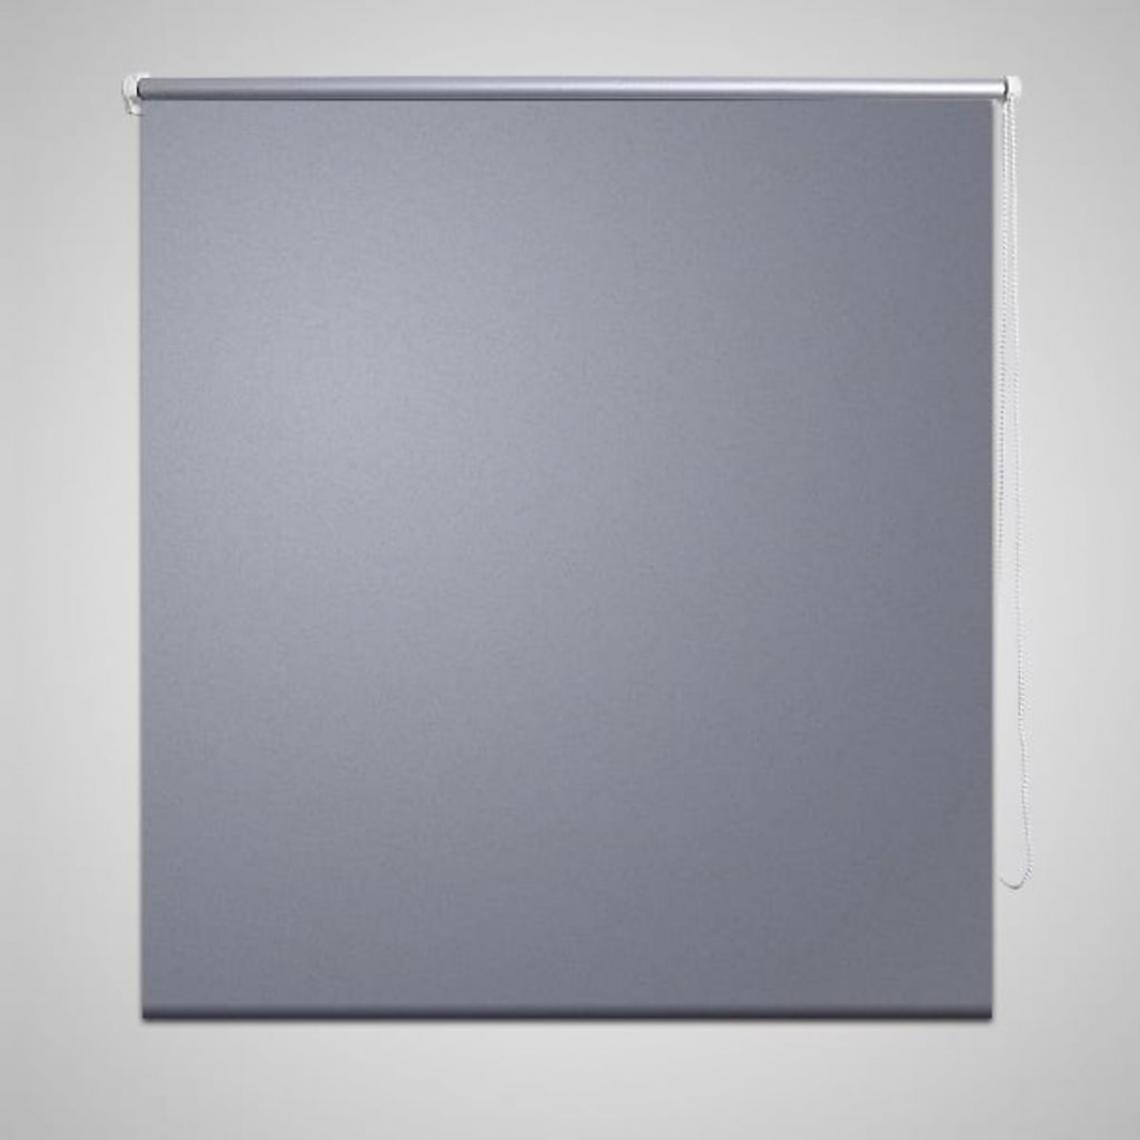 Chunhelife - Store enrouleur occultant 120 x 175 cm gris - Store banne